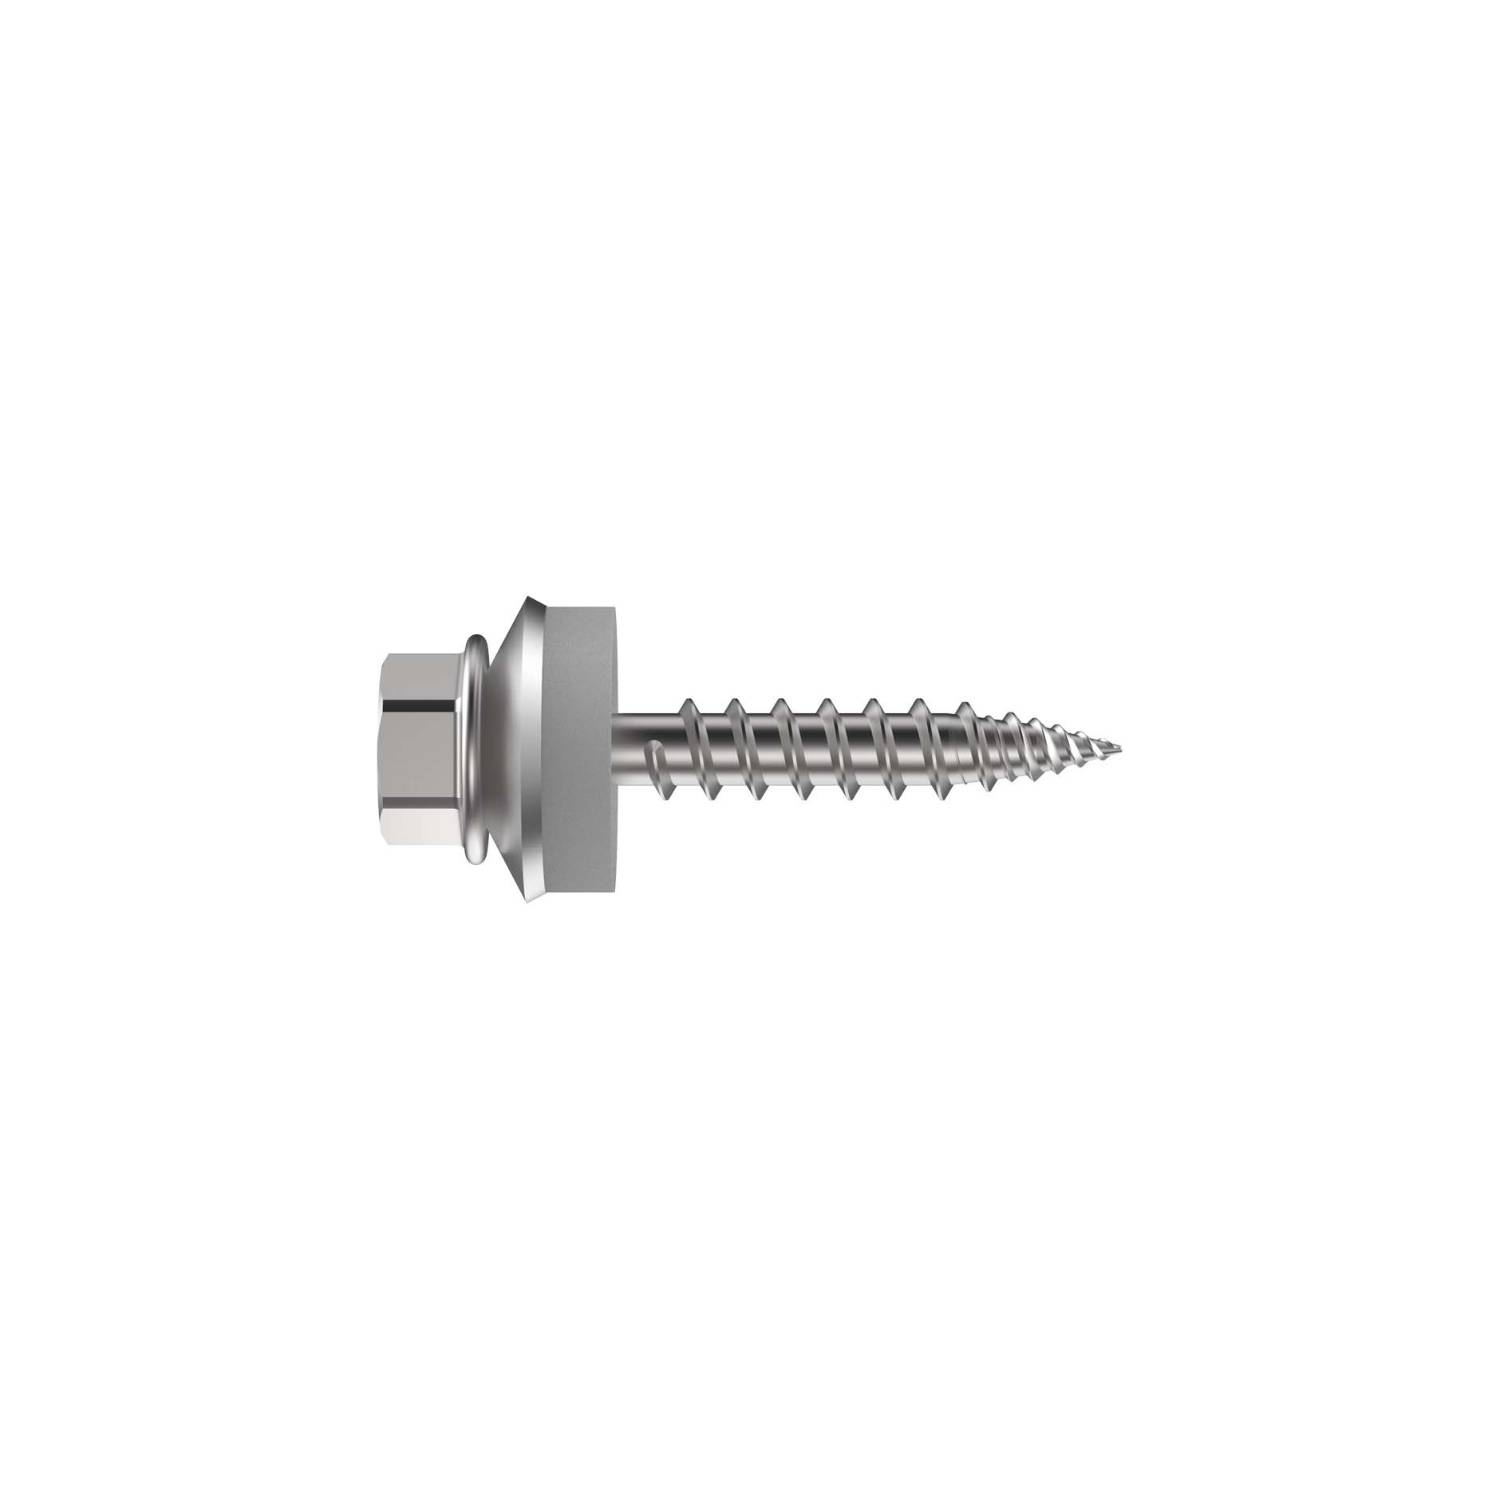 Clamping Fastener with Pierce Point - CXLW-48  - Austenitic Stainless Steel Fasteners